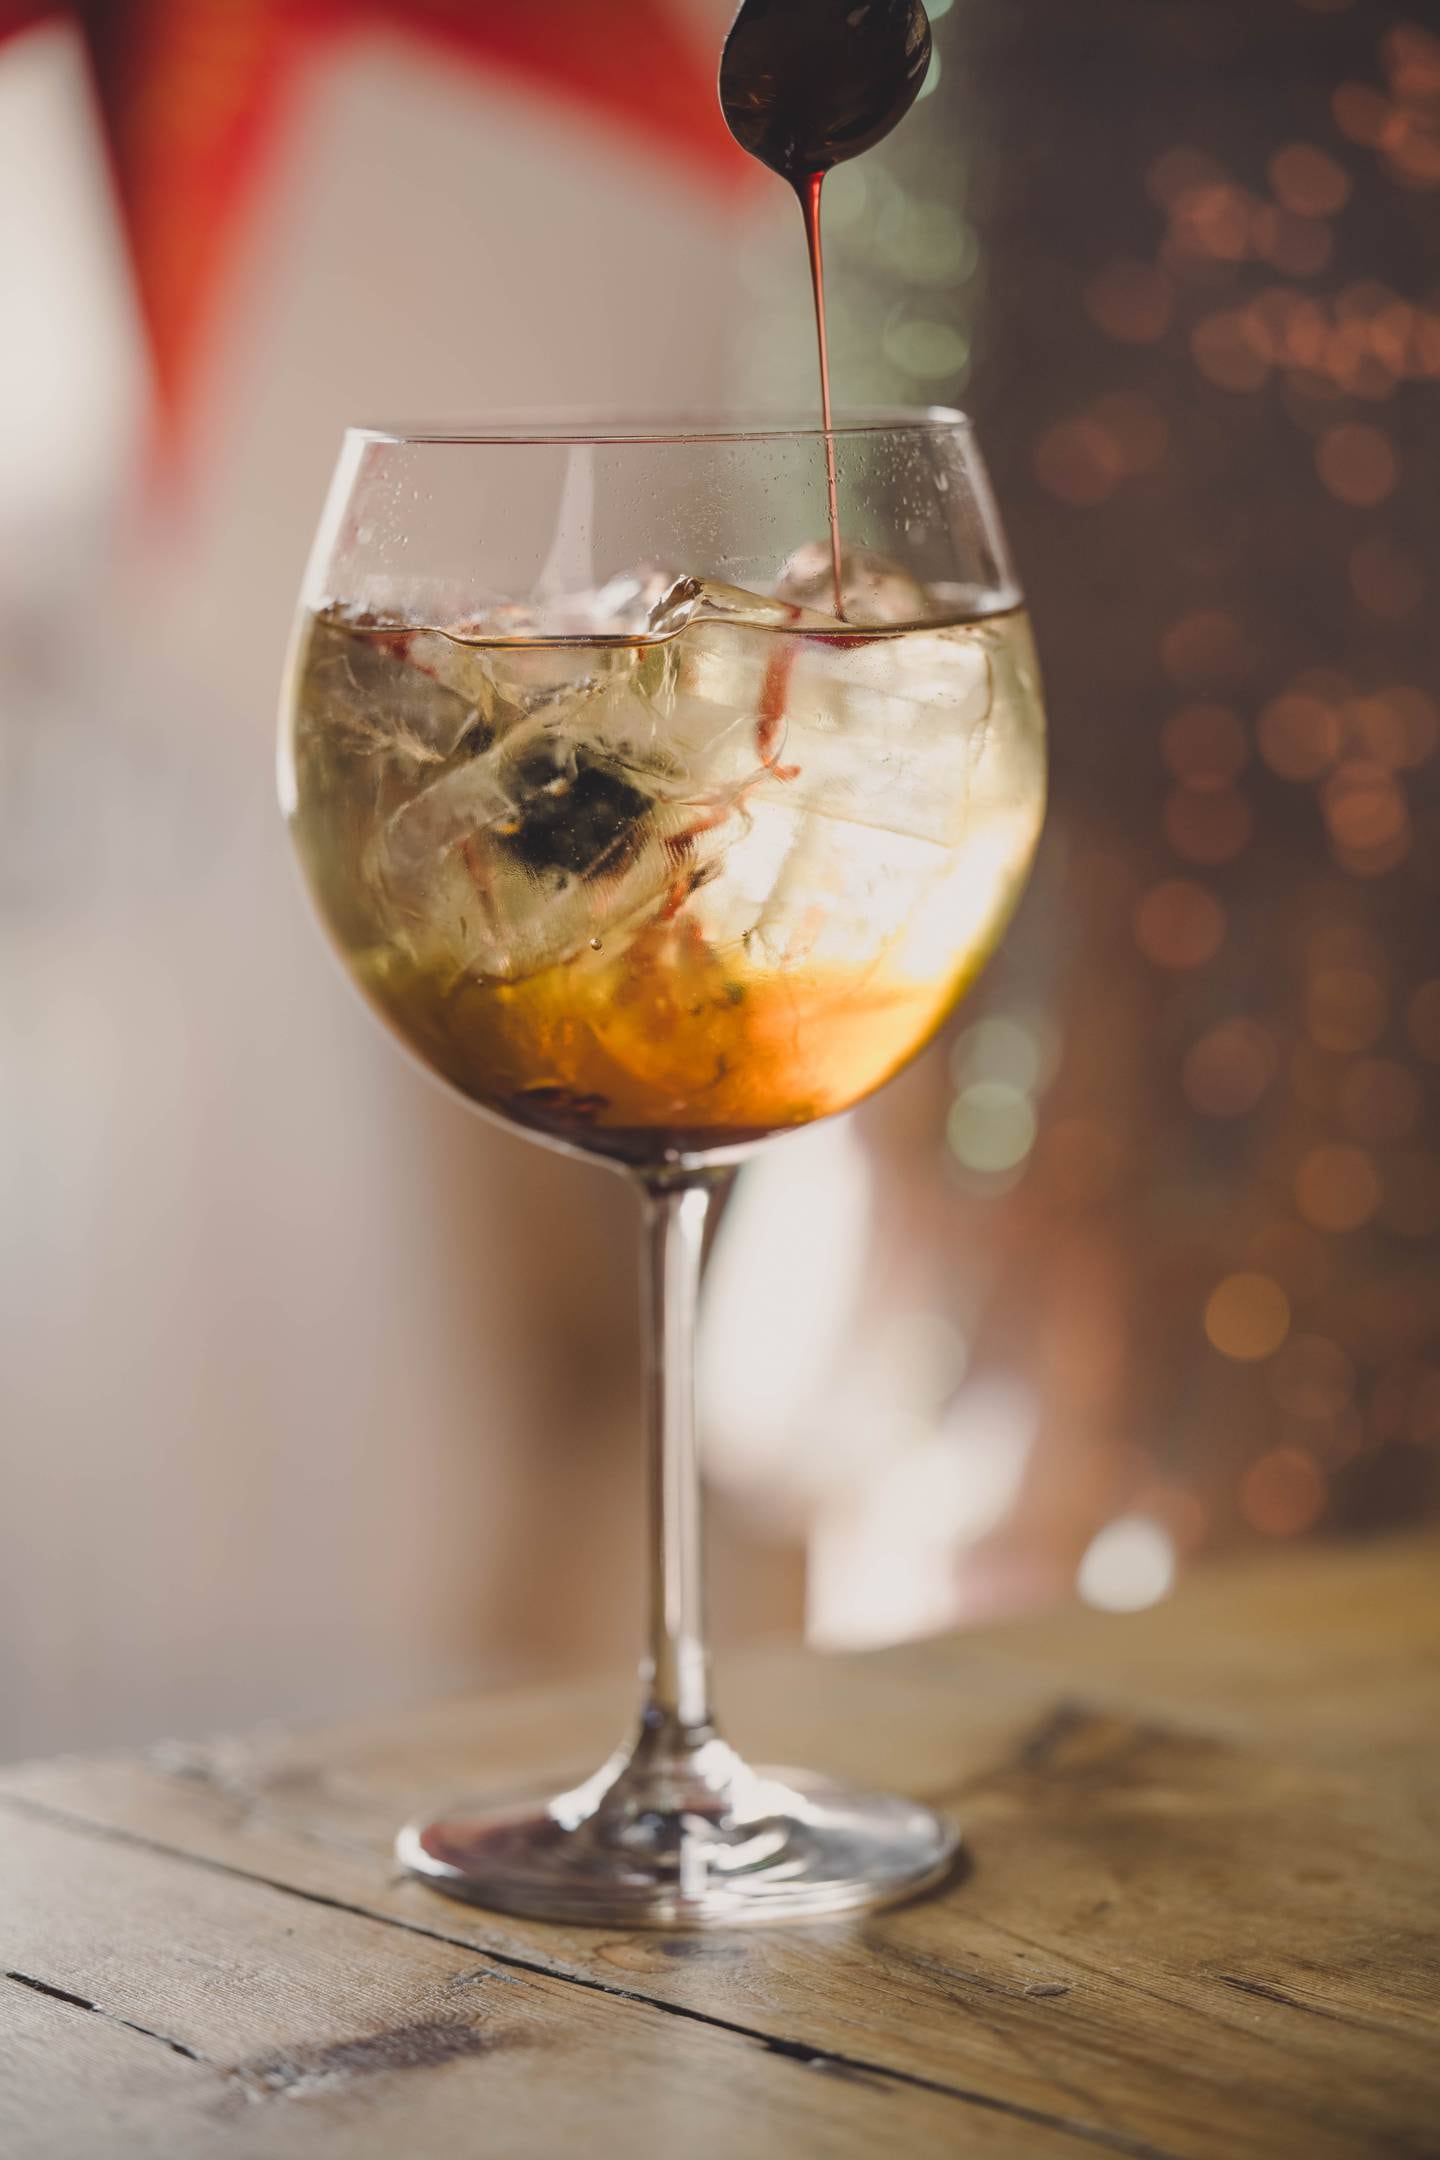 Cherry Christmas Cocktail with Valentia Island Vermouth